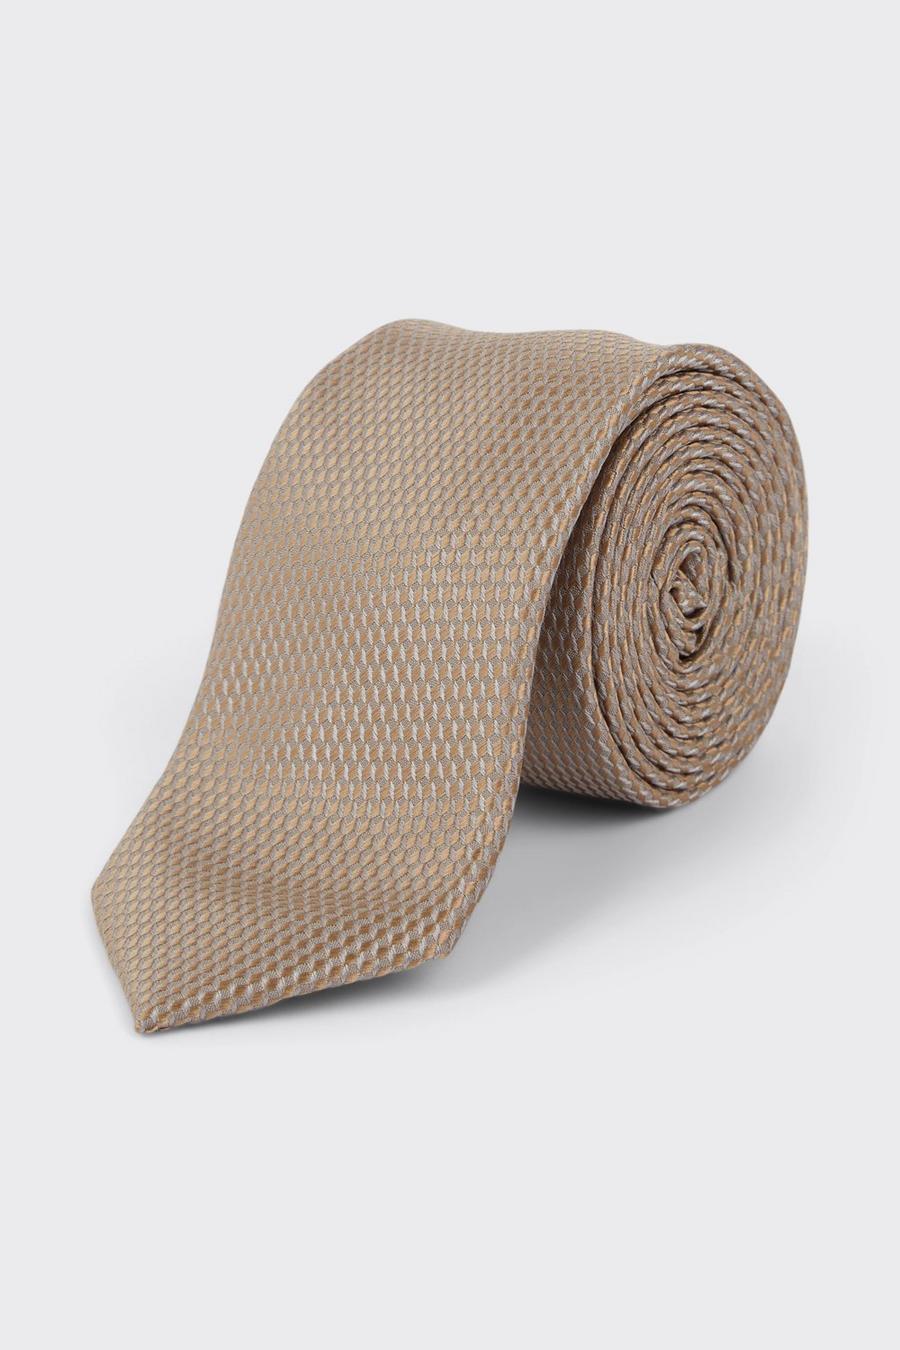 Champagne Two Tone Textured Tie